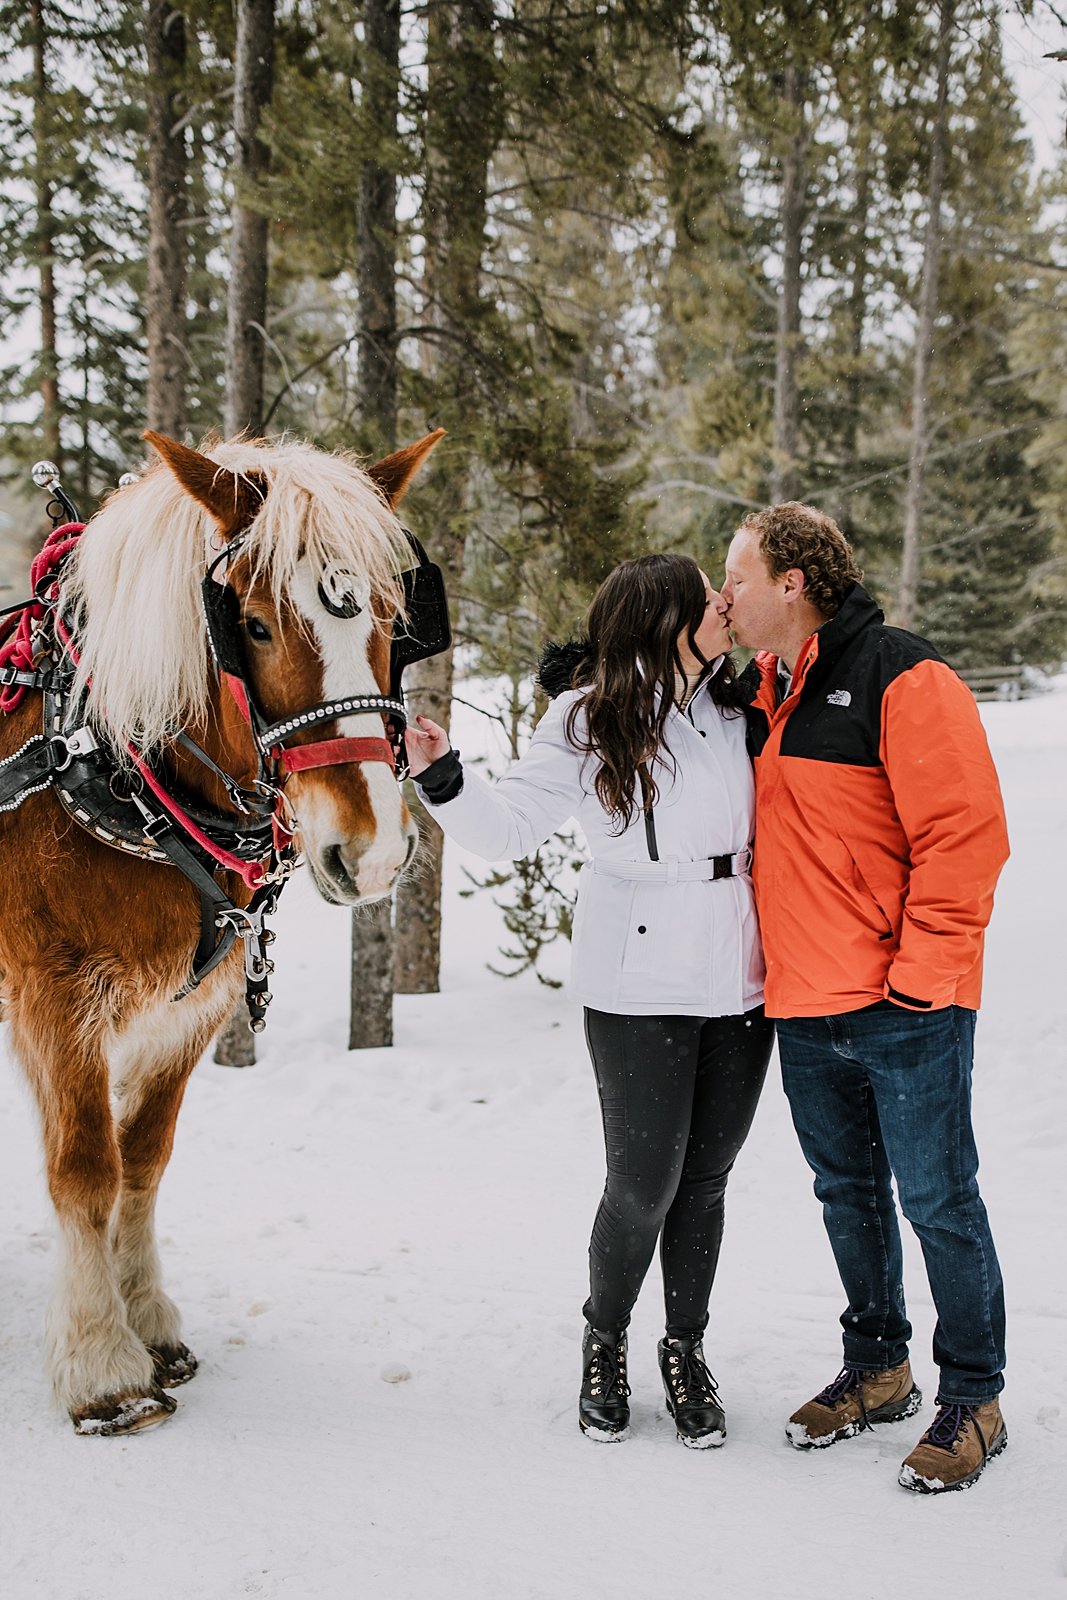 couple kissing while holding the tack of a sleigh horse in the snow, golden horseshoe sleigh ride photographer, golden horseshoe sleigh ride proposal photographer, good times adventures photographer